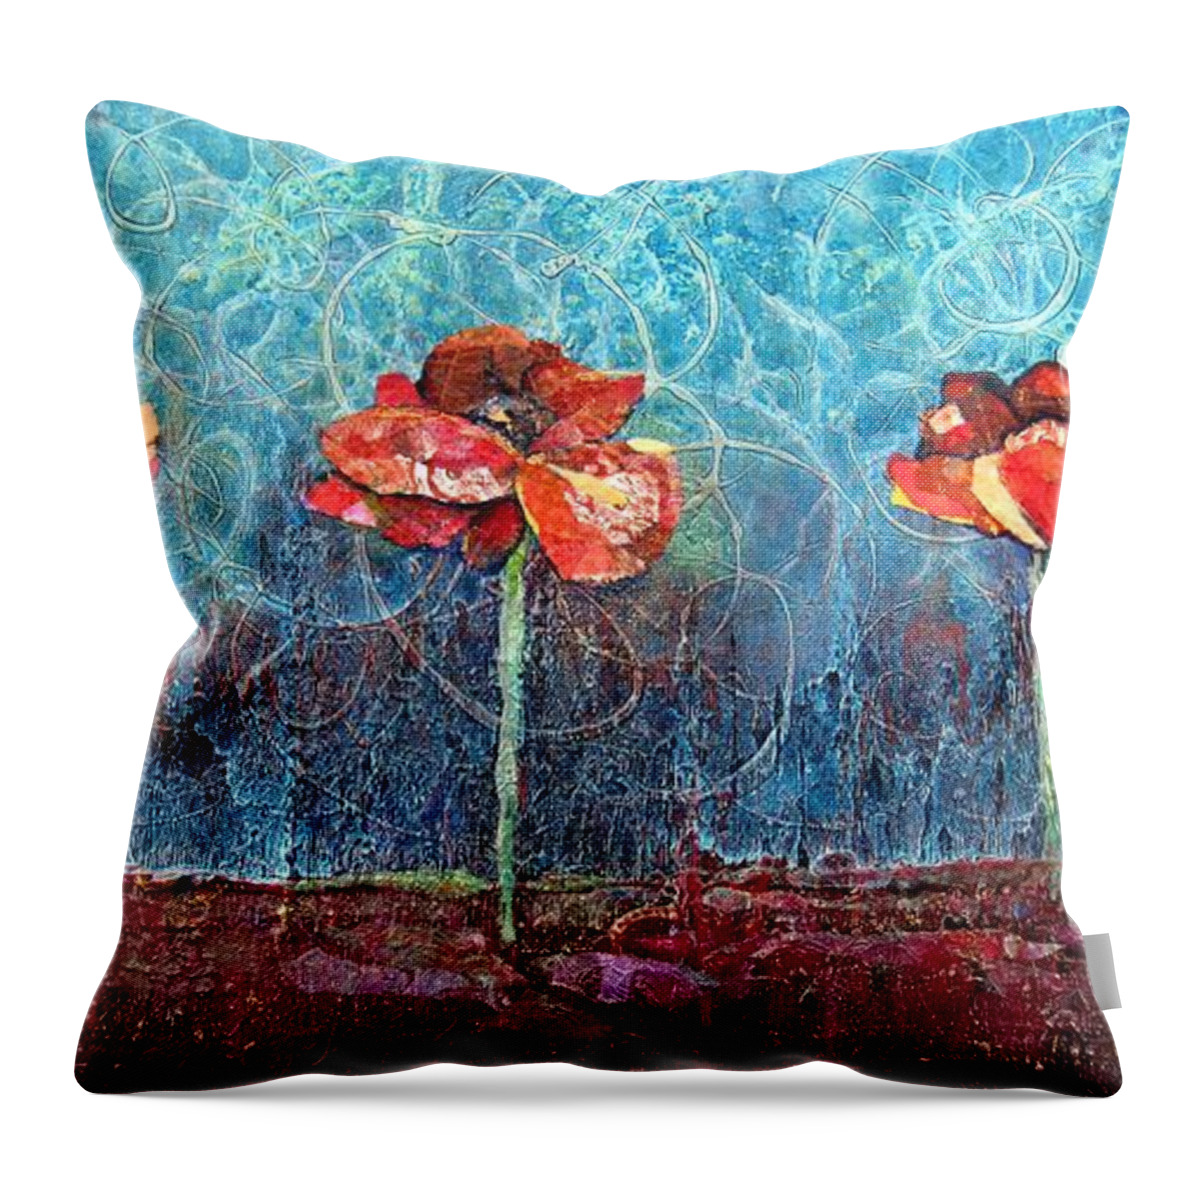 Poppy Throw Pillow featuring the painting Three Poppies by Shadia Derbyshire